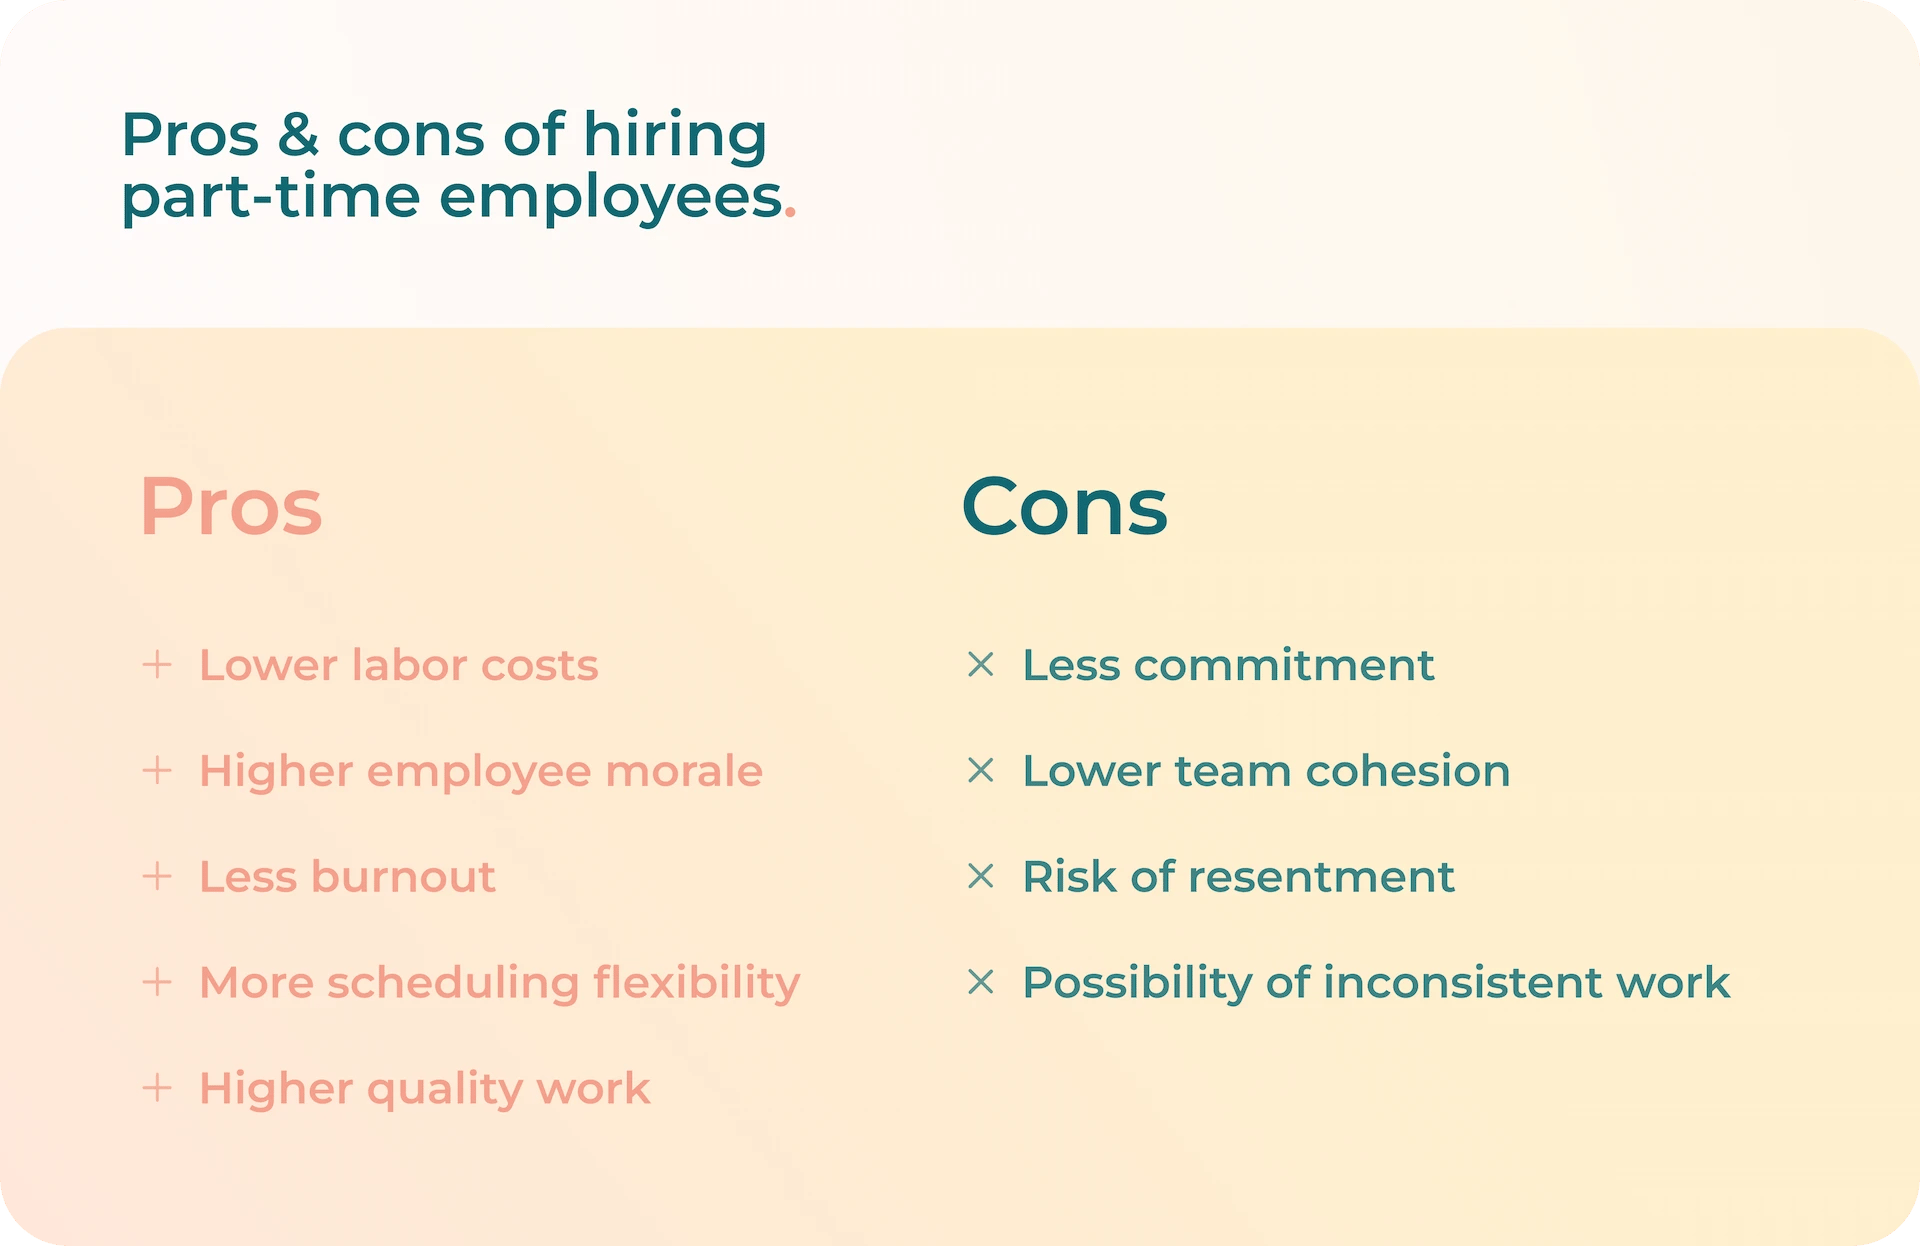 List of pros and cons of hiring part-time employees